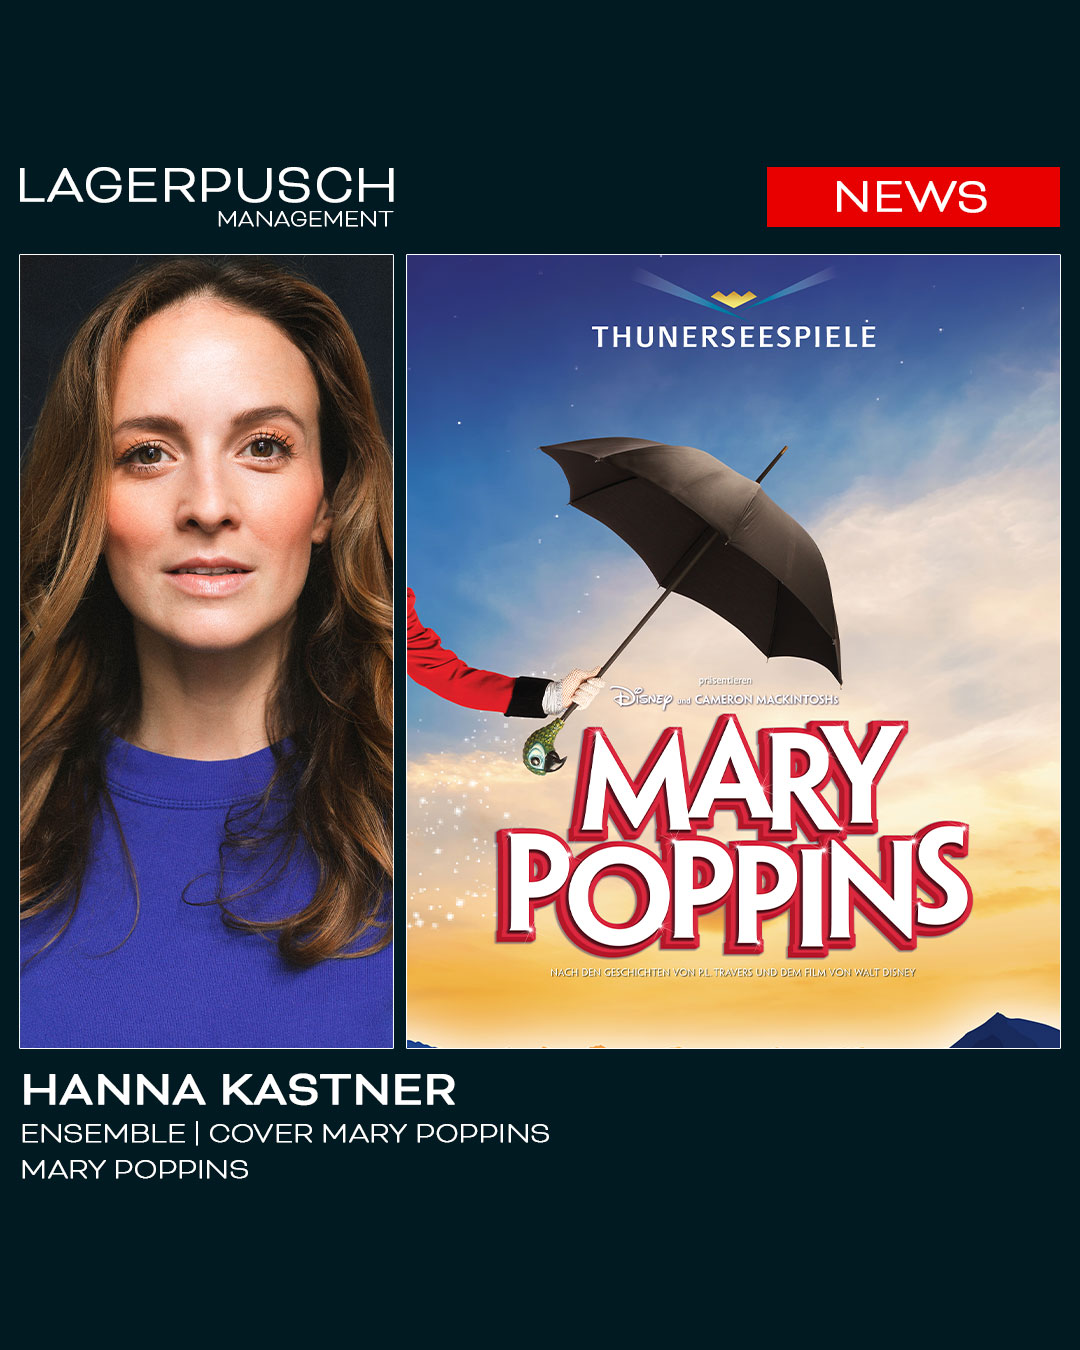 Hanna Kastner wird Cover Mary Poppins und Ensemble bei „Mary Poppins“ in Thun